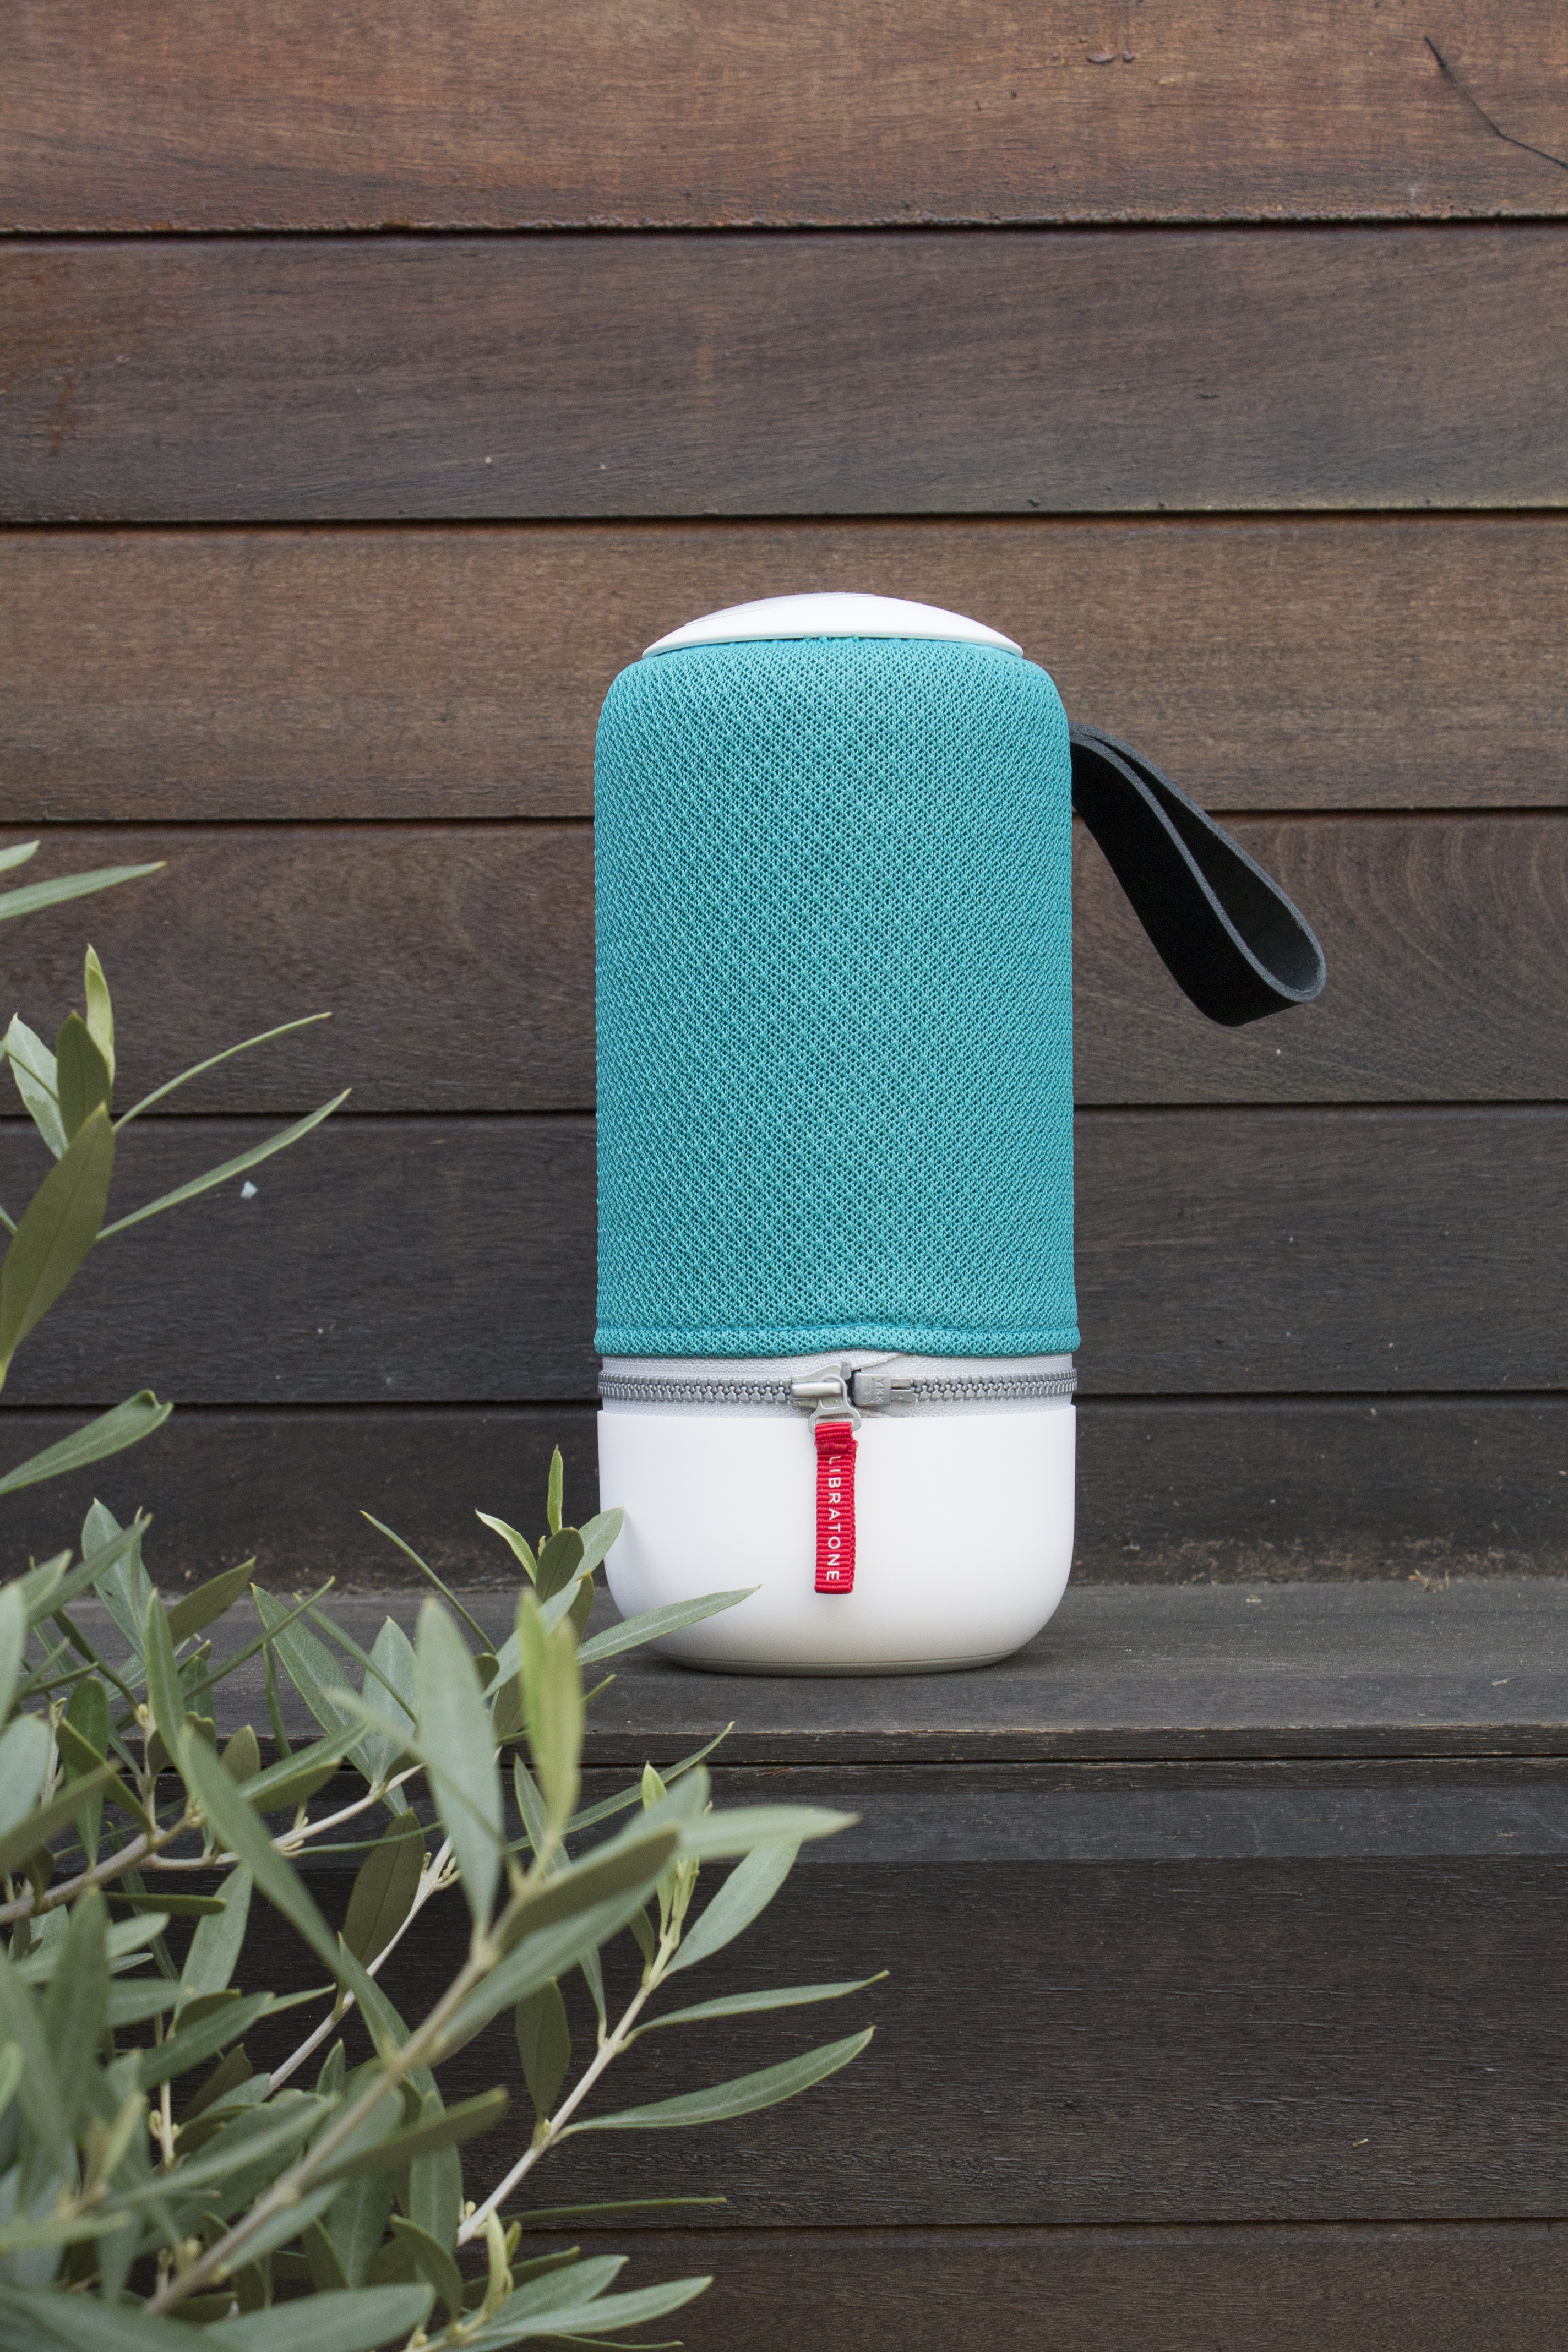 Portable-music-outdoors-bluetooth-Libratone-photo-by-Little-Big-Bell